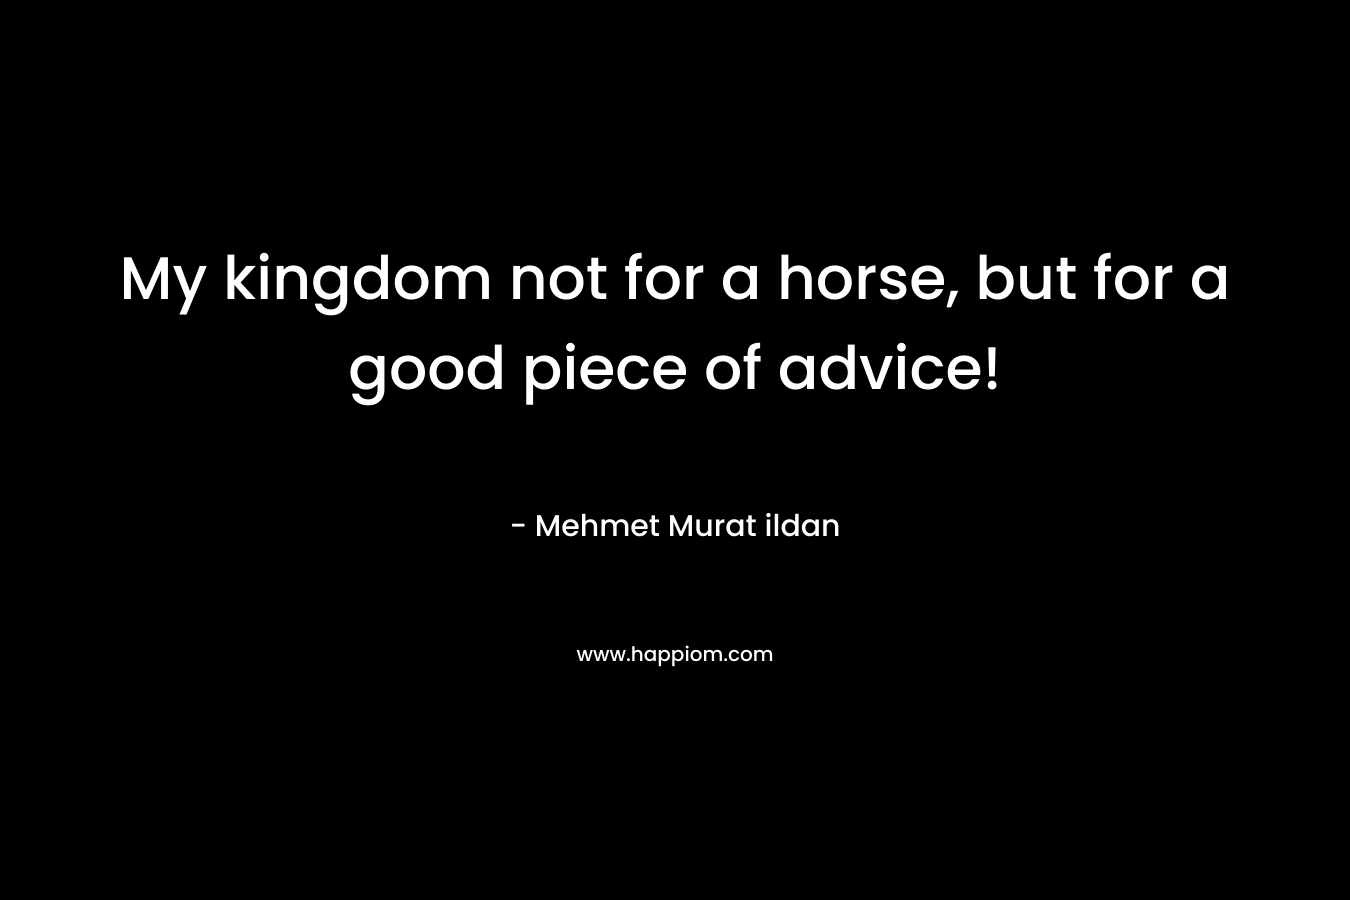 My kingdom not for a horse, but for a good piece of advice! – Mehmet Murat ildan